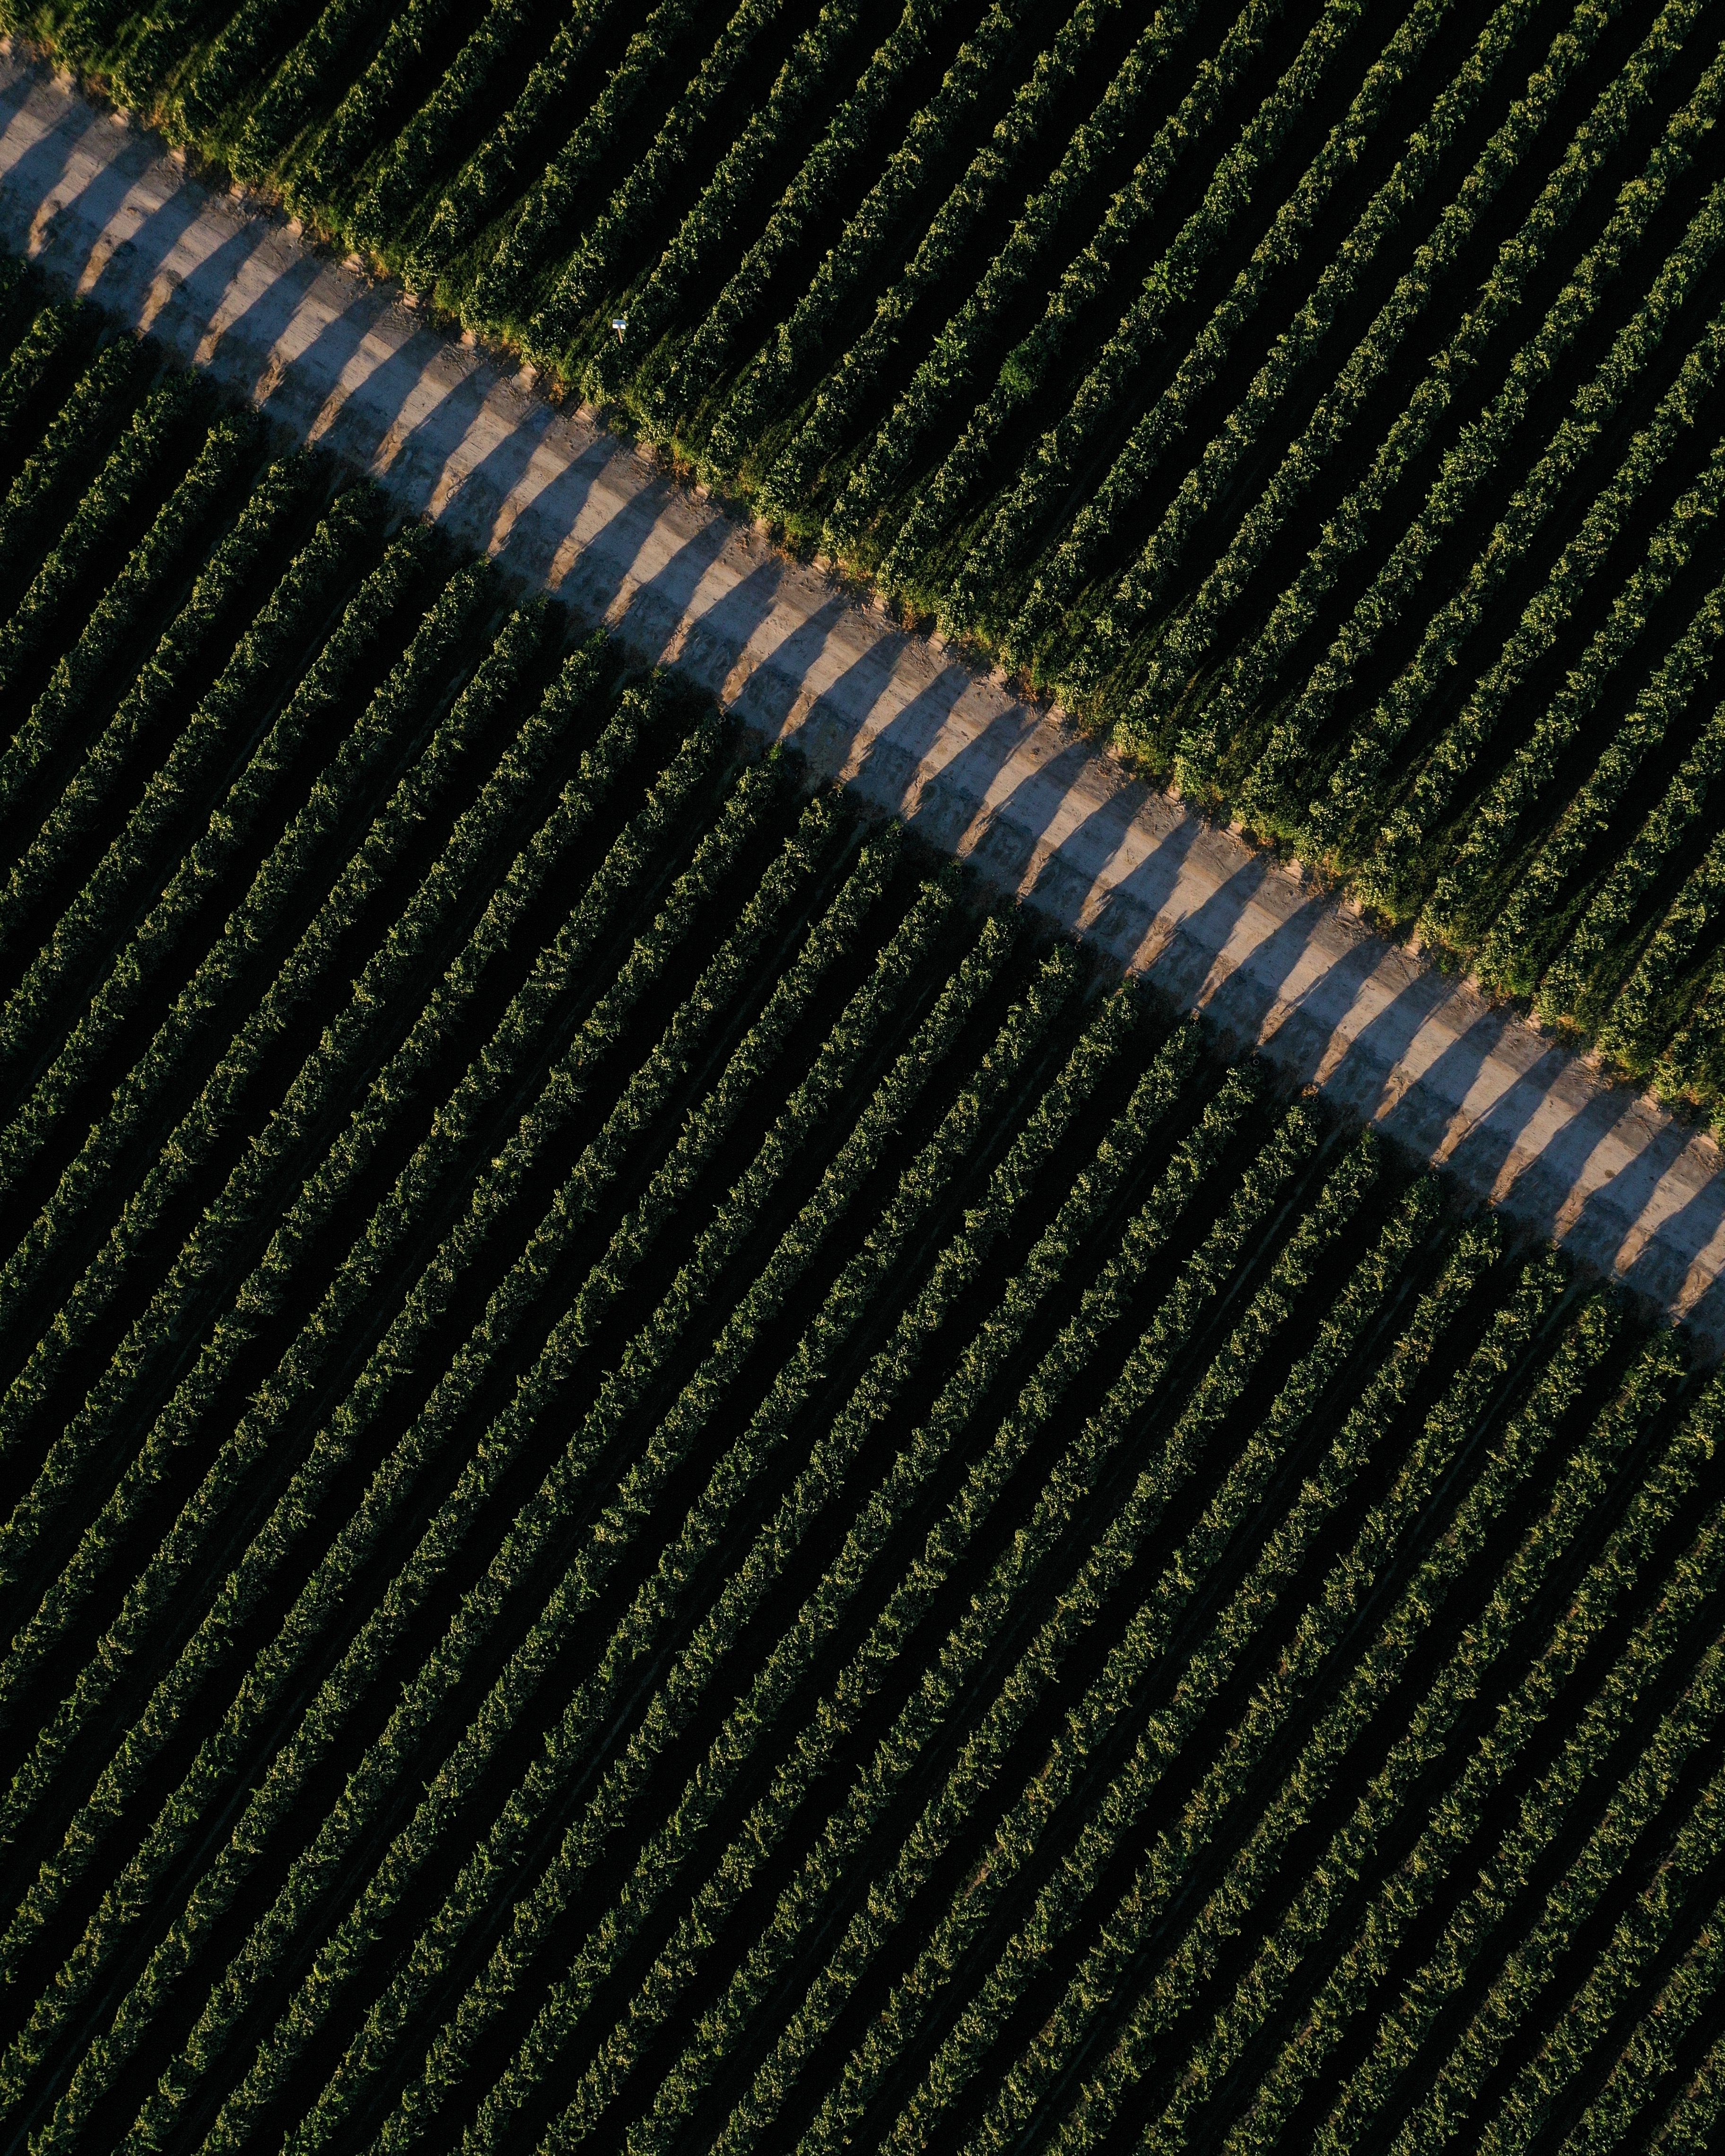 Aerial view of grapes in Madera, California